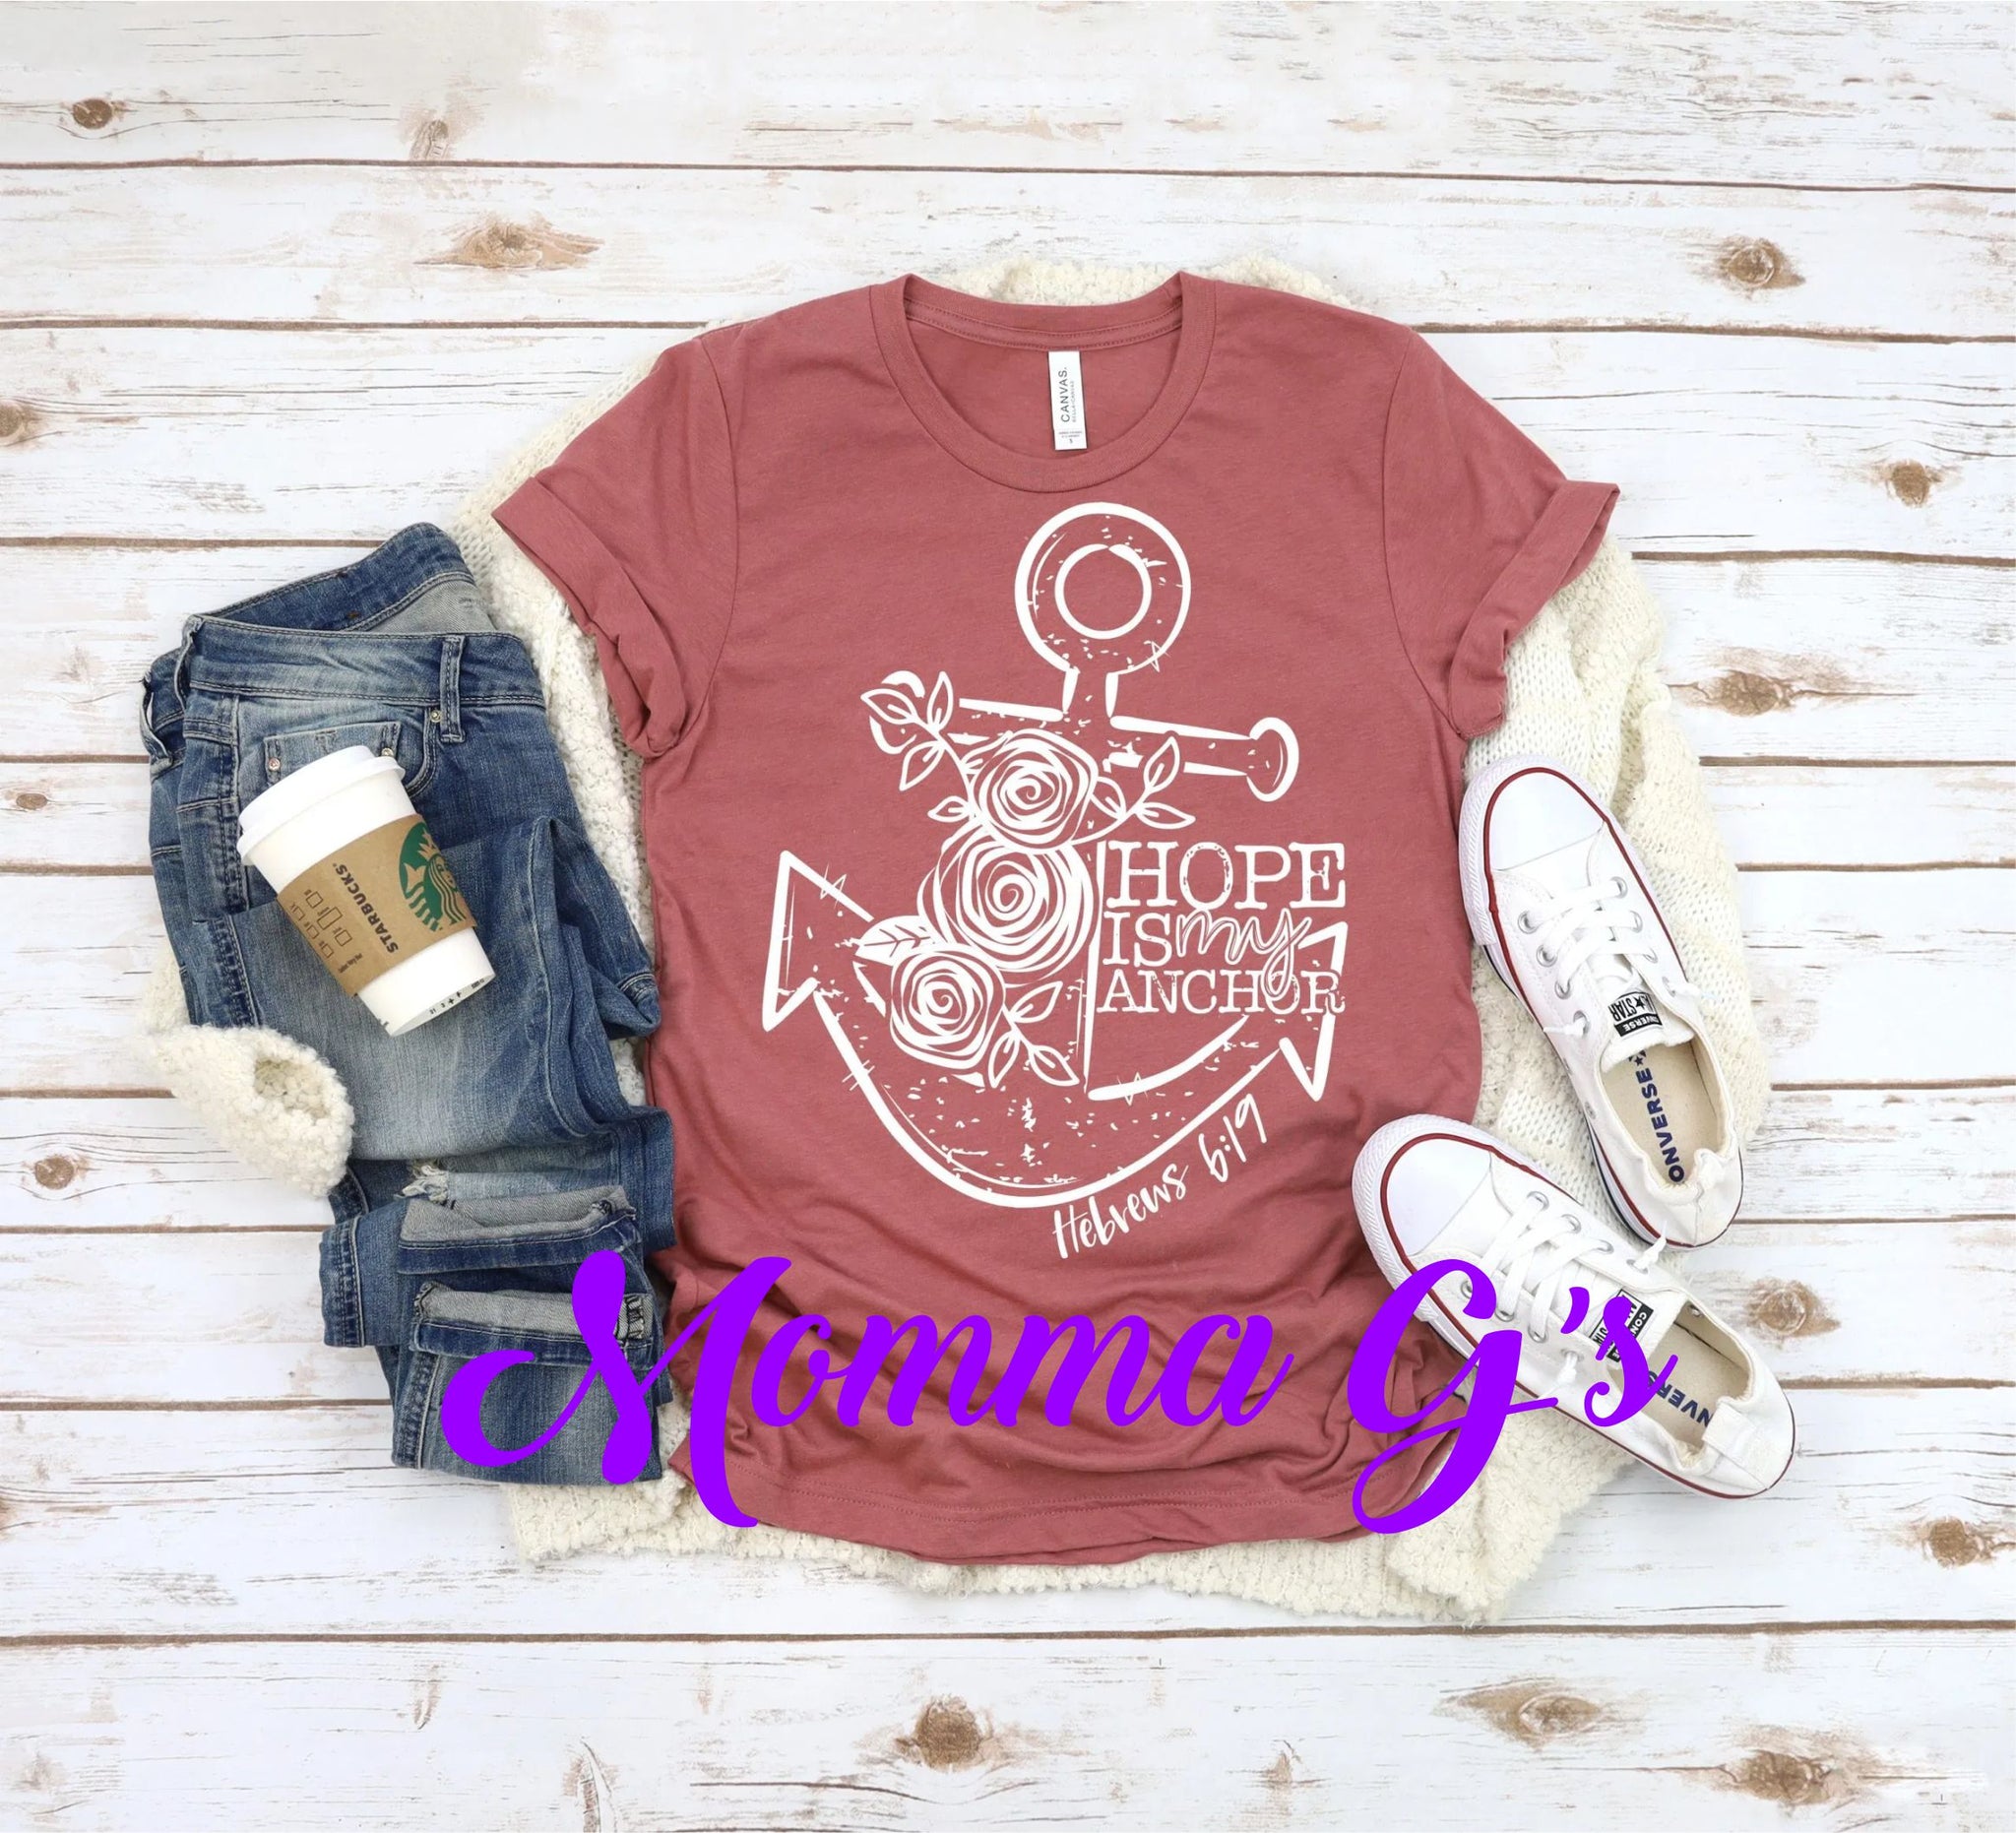 Hope is my Anchor Hebrews 6:19 T-shirt, tshirt, tee - Momma G's Children's Boutique, Screen Printing, Embroidery & More